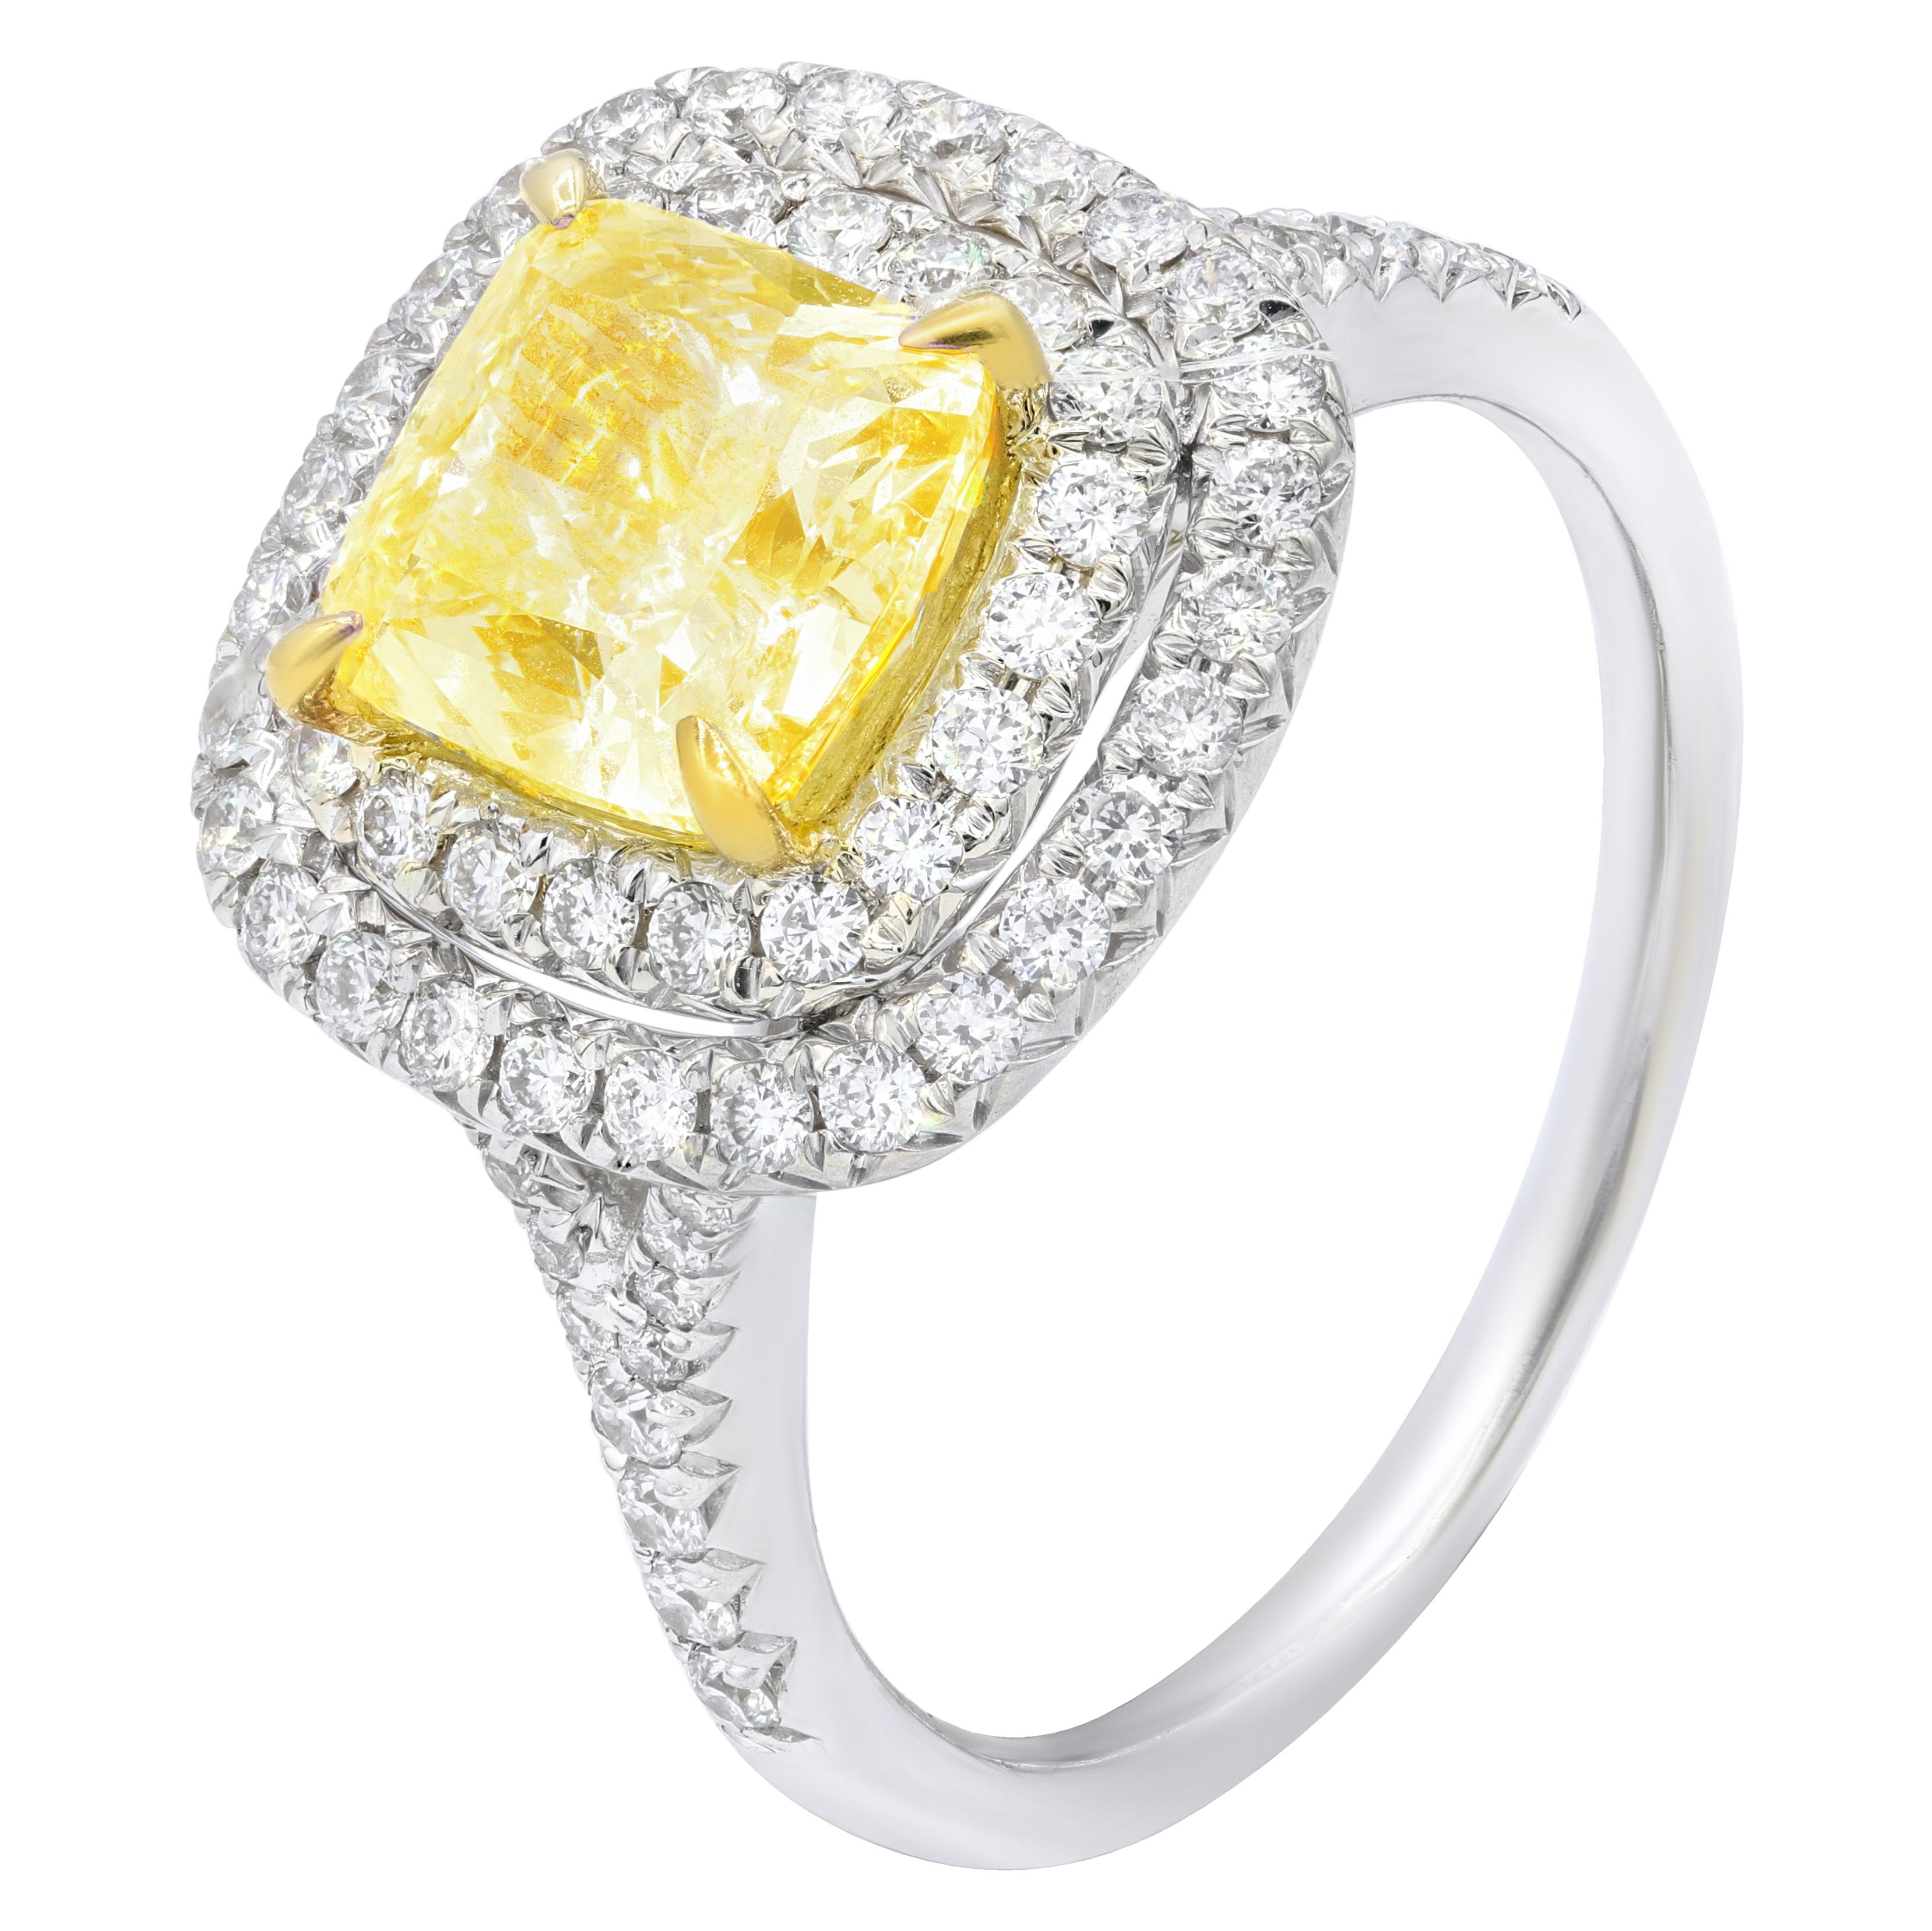 18K White gold fancy light yellow diamond ring with center GIA cushion cut 2.01 ct FLY-VVS2 Set in double halo shank micropave setting 0.65 ct total weight.